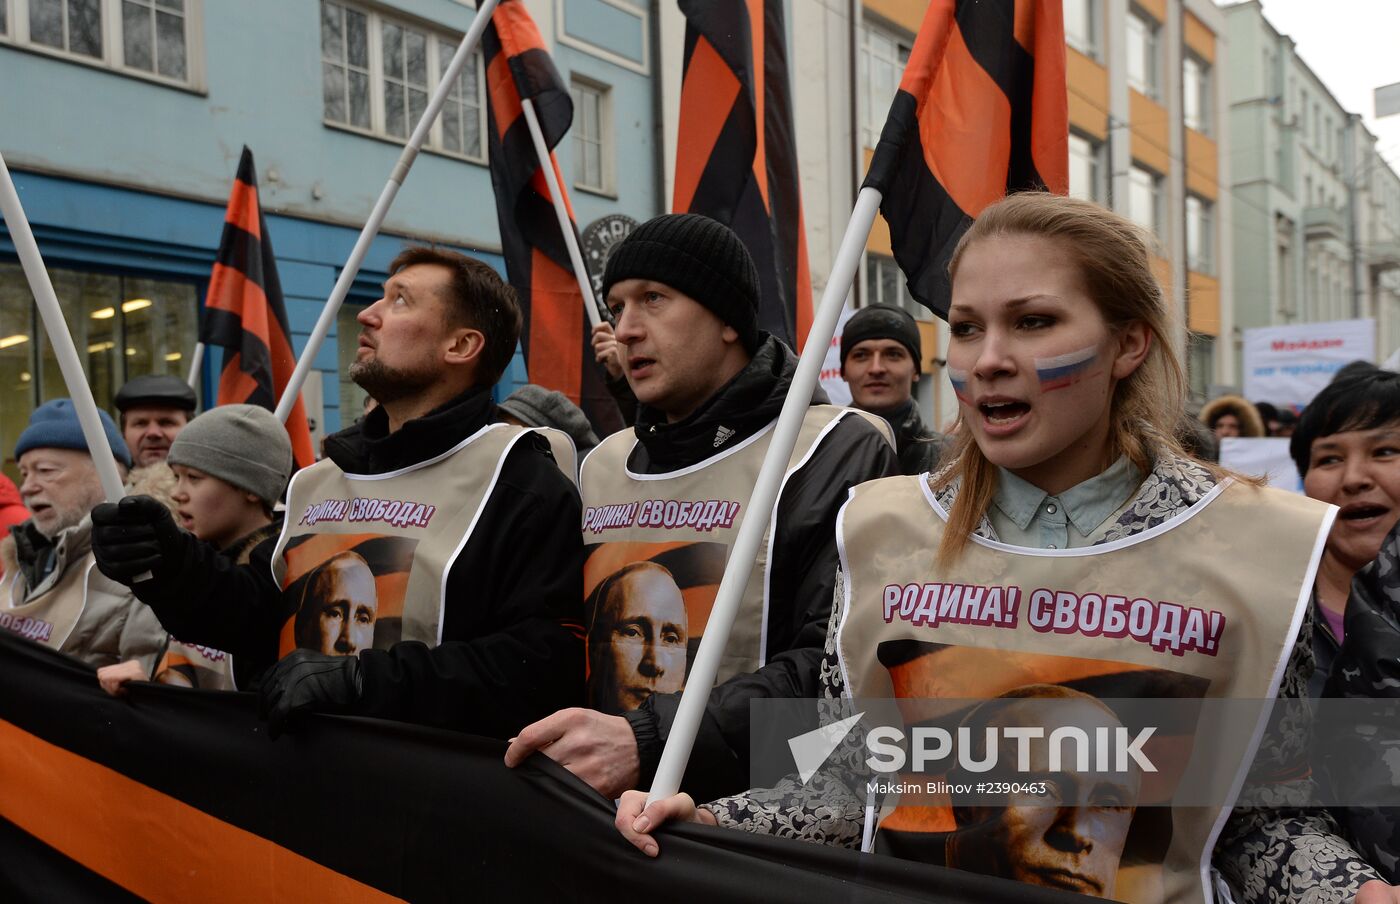 Moscow march supporting compatriots in Ukraine